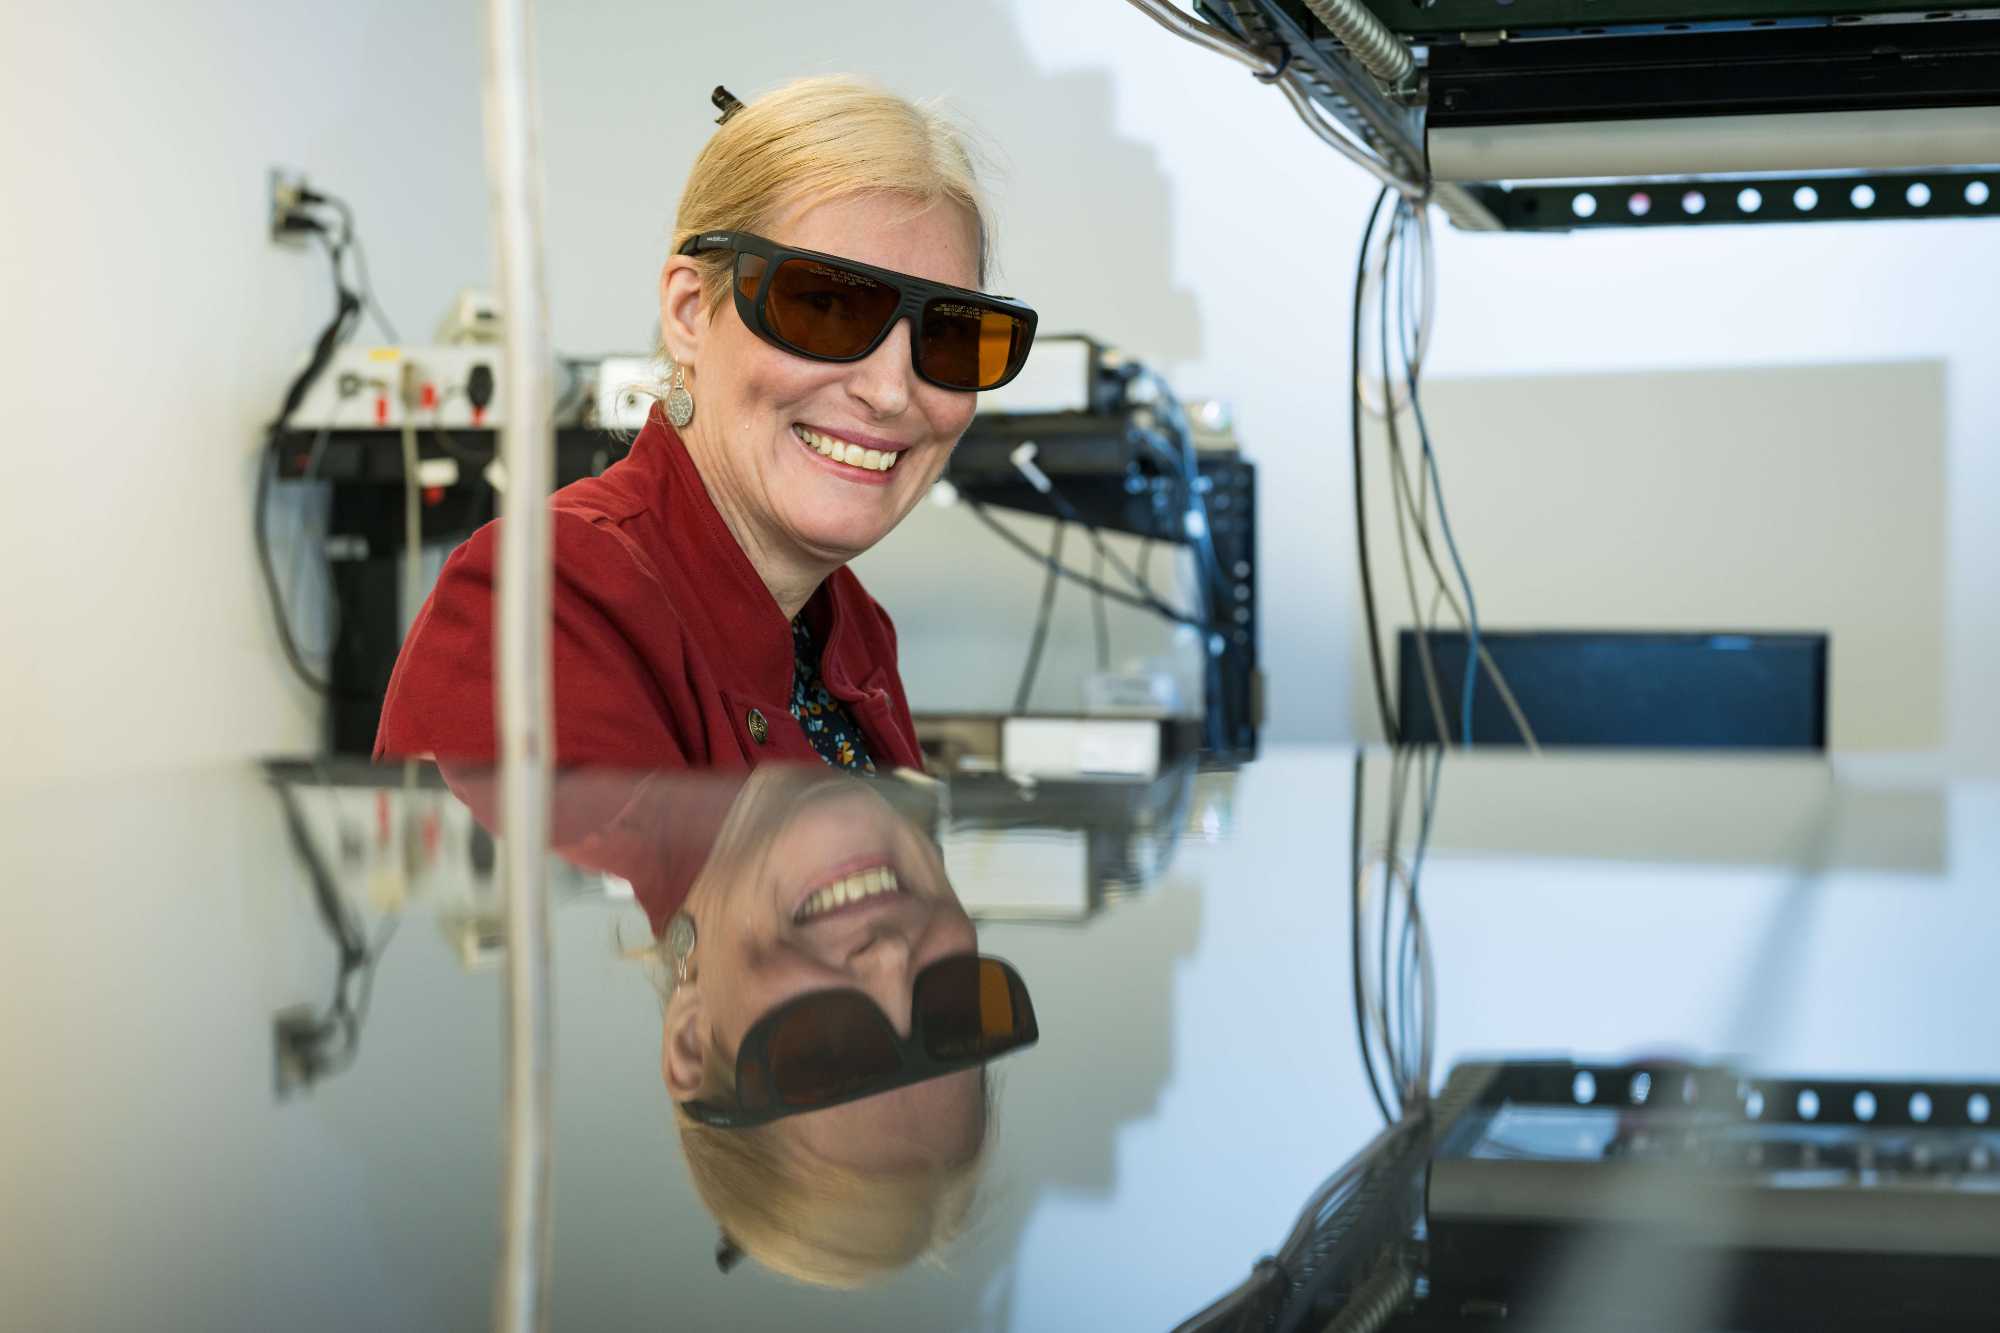 Professor and chemical engineer Astrid Muller smiling while wearing protective eyewear in her lab, with her reflection appearing in the lab equipment below her. 